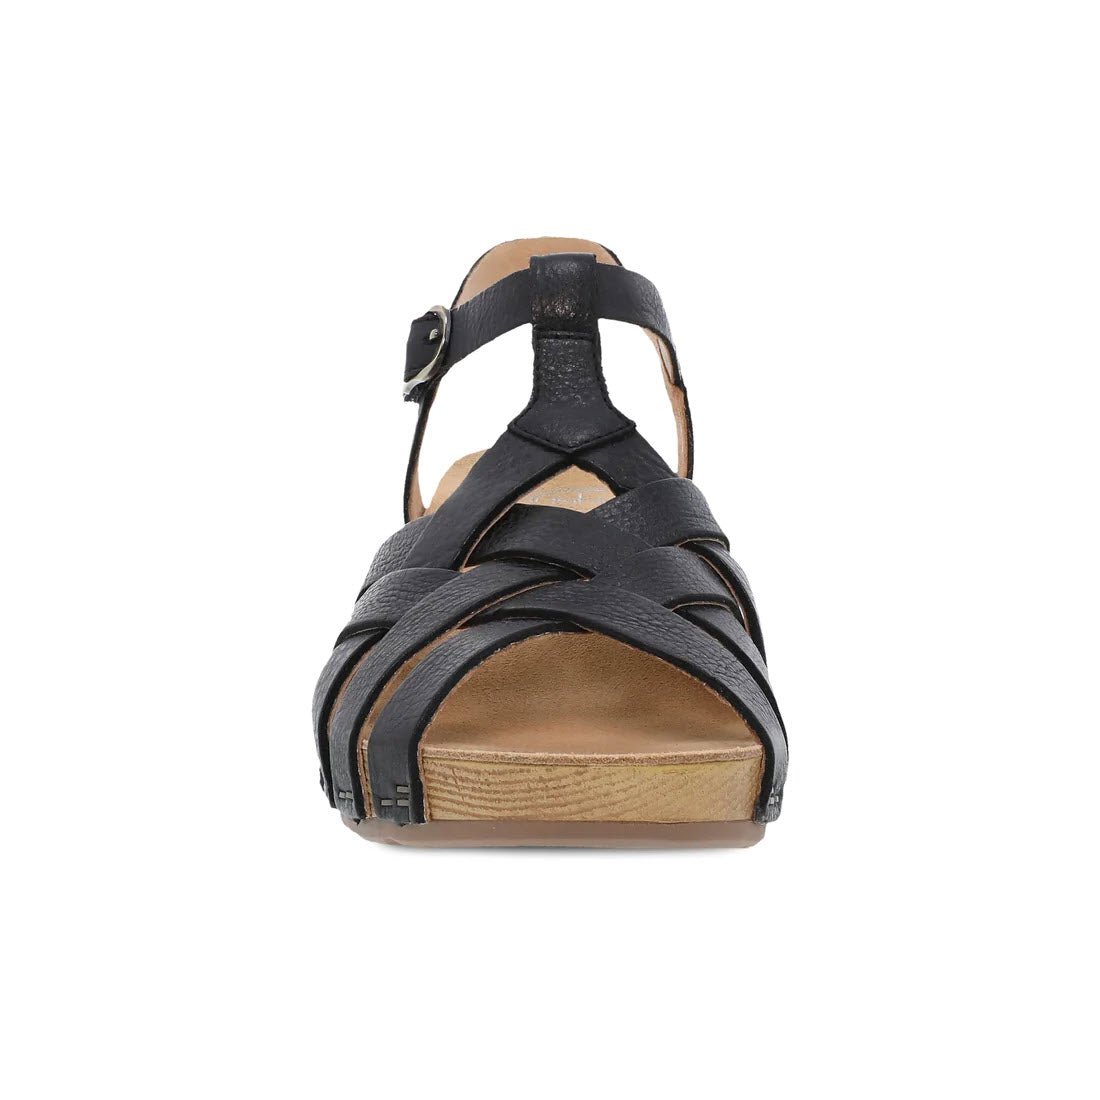 A Dansko Tinley Black women&#39;s sandal with chunky chic soles and buckle closure, displayed on a white background.